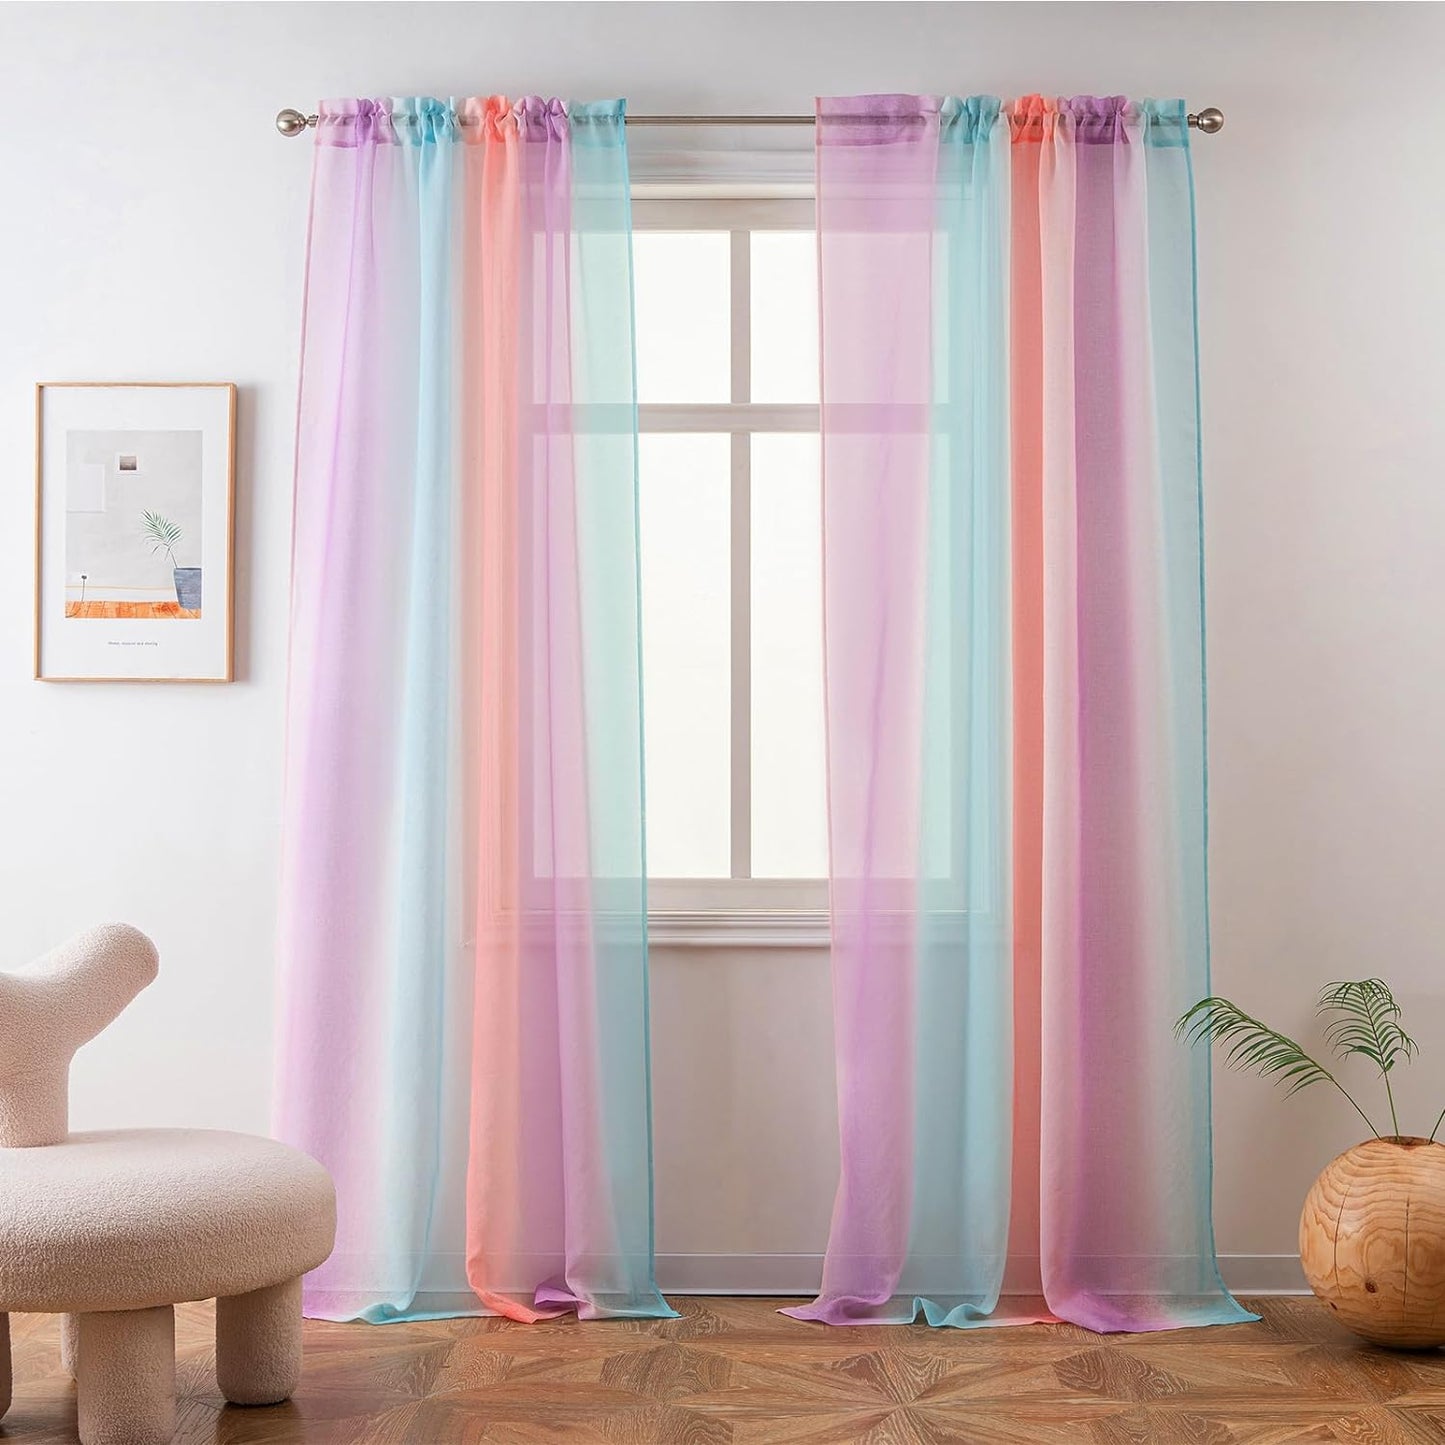 Yancorp 2 Panel Sets Semi Bedroom Curtains 63 Inch Length Sheer Rod Pocket Curtain Linen Teal Turquoise Purple Ombre Girls Living Room Mermaid Bedroom Nursery Kids Decor (Turquoise Purple, 40"X63")  Yancorp Rainbow 52"X84" 